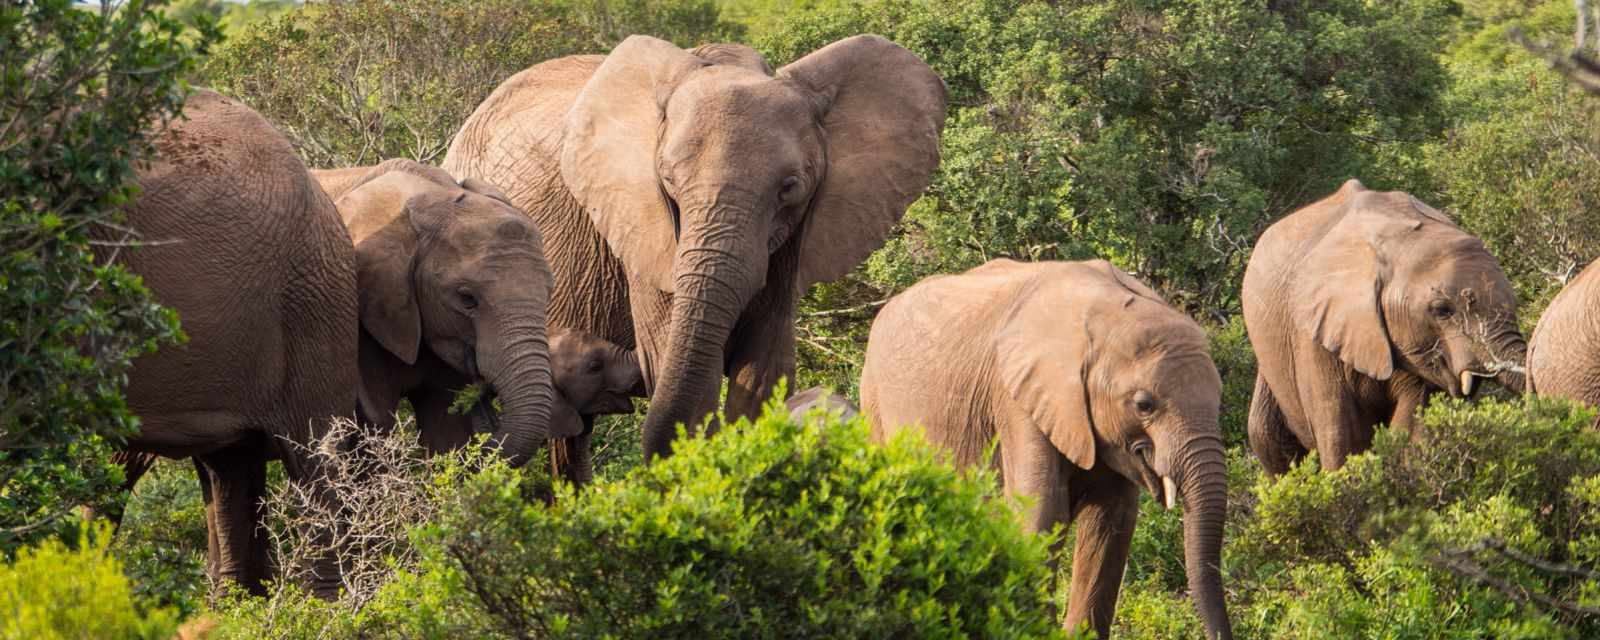 Self-Guided Safari in Addo Elephant National Park and 8 Facts